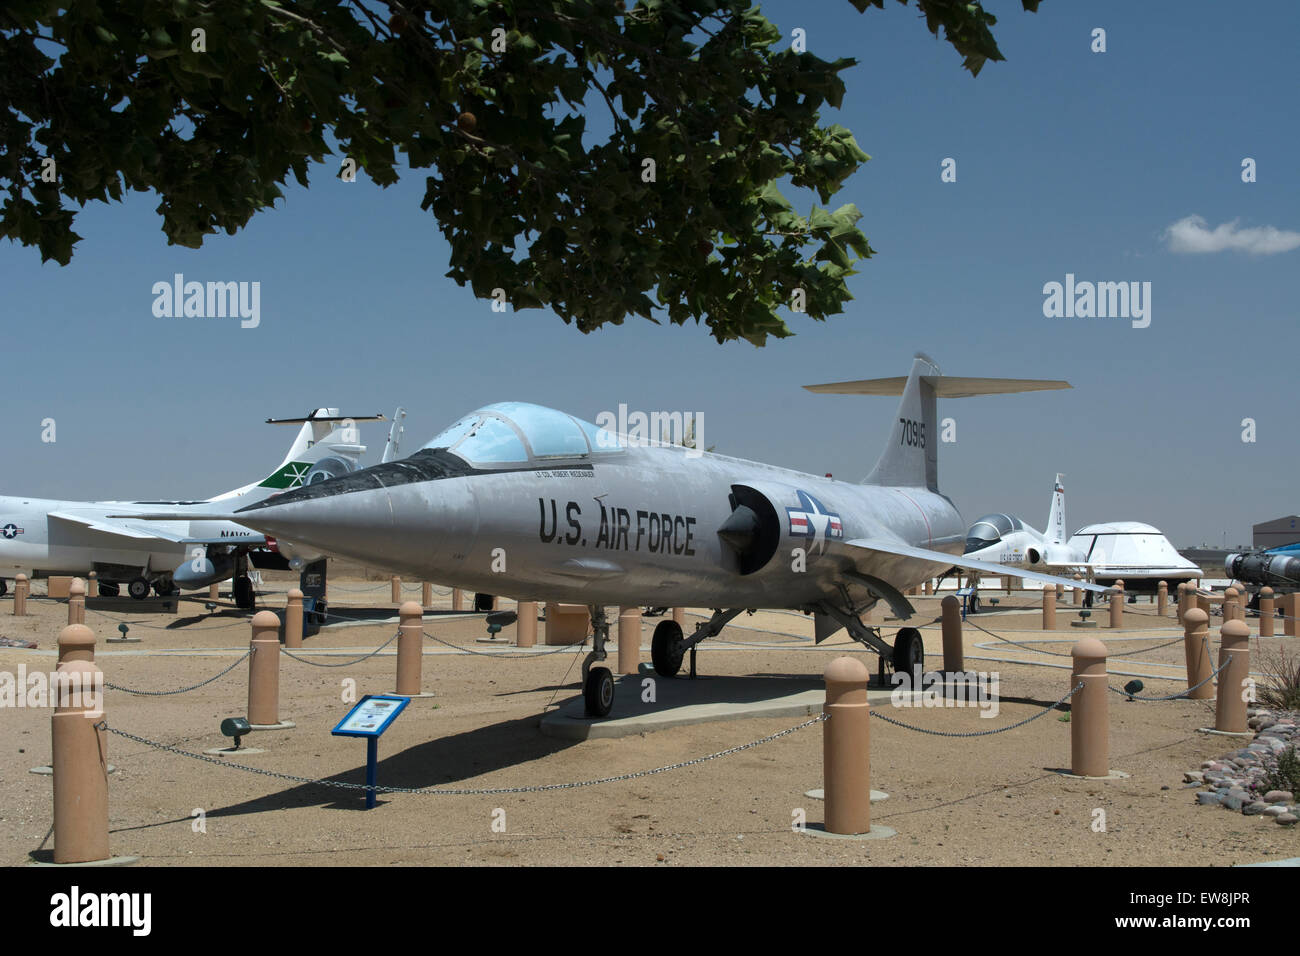 F-104 Starfighter, one of the aircraft at the Joe Davies Heritage Airpark at Palmdale in California Stock Photo